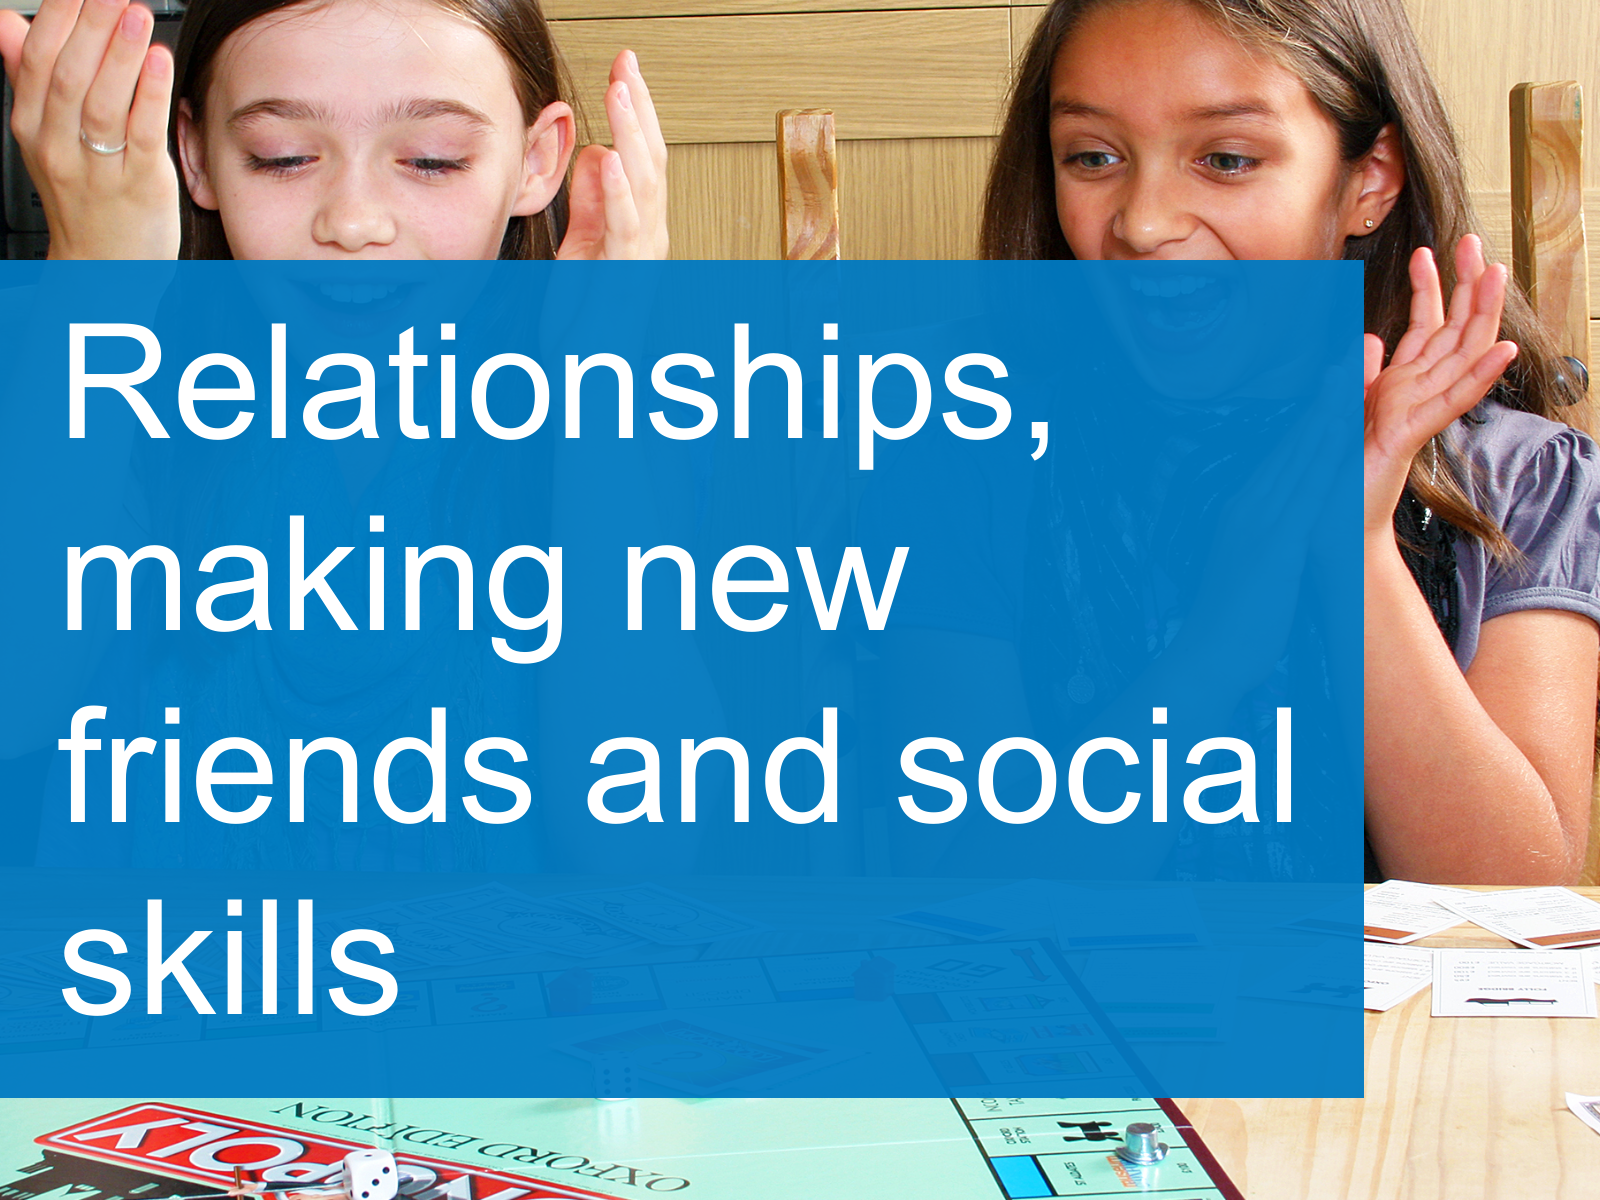 Relationships, making new friends and social skills